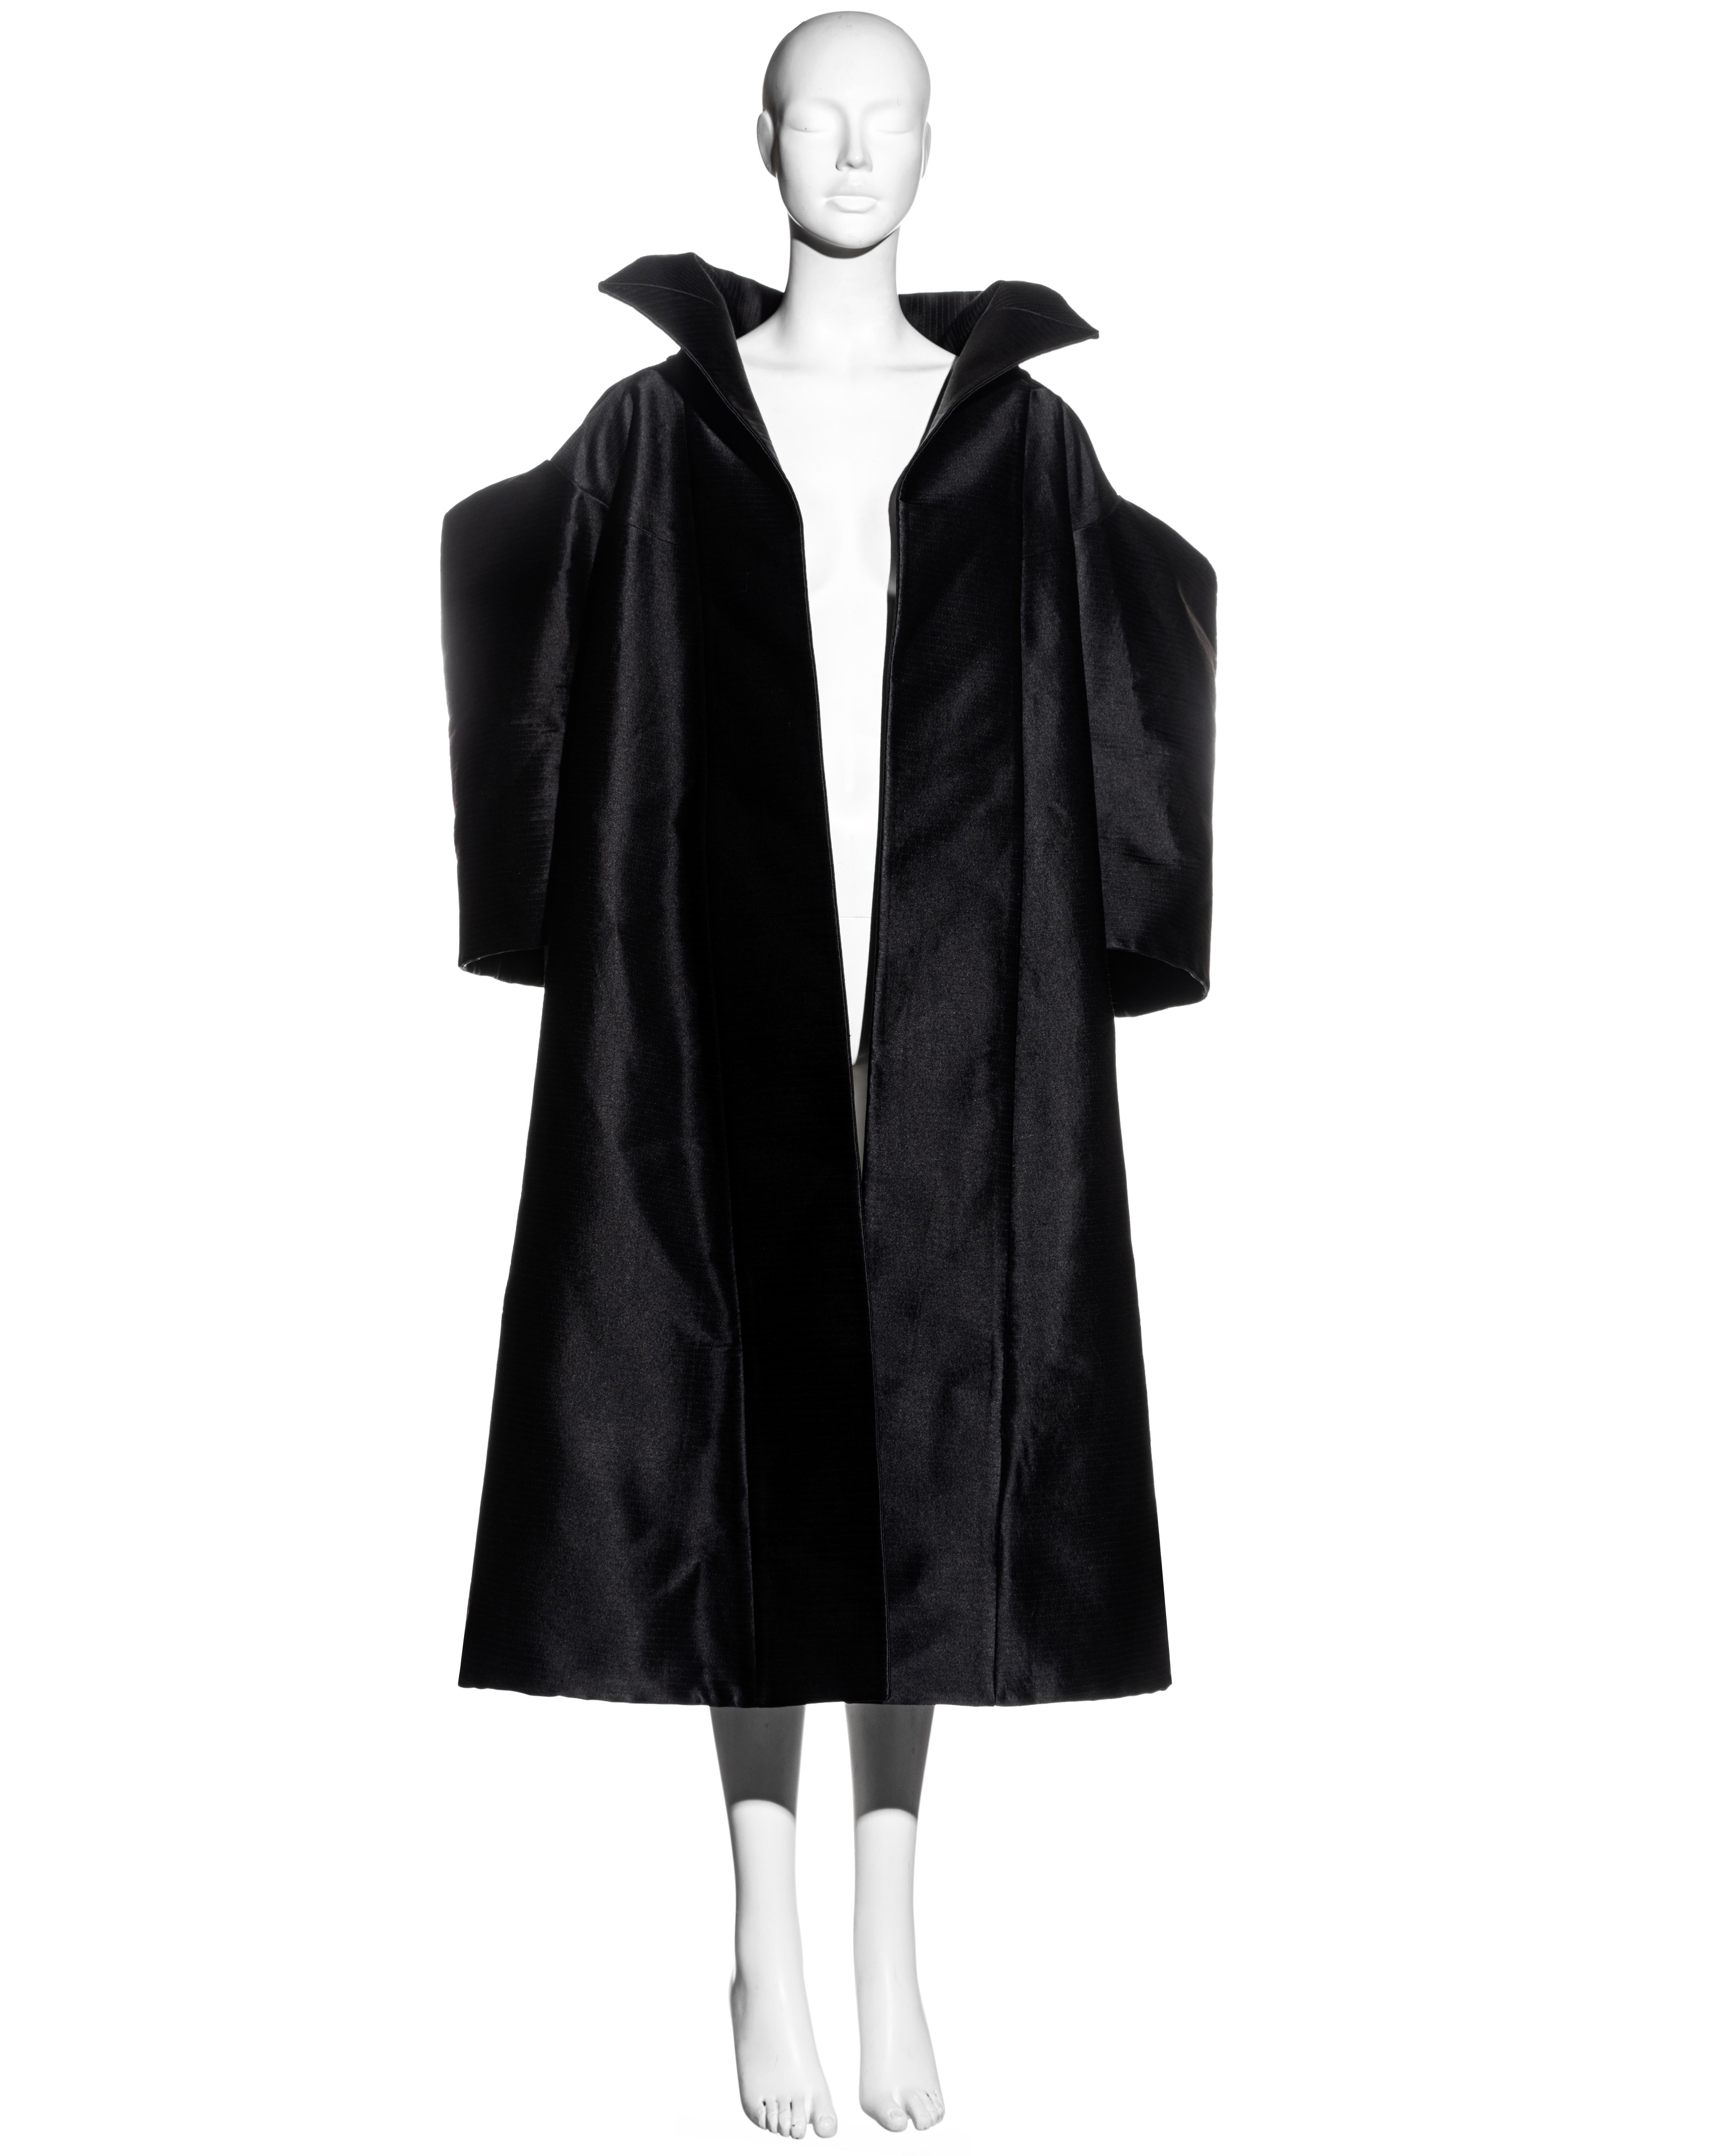 ▪ John Galliano black silk showpiece opera coat 
▪ Heavyweight 
▪ Standing collar 
▪ Allover parallel topstitch designed to add structure and volume to the fabric
▪ Cube shoulders and wide-cut sleeves 
▪ Silk lining 
▪ Haute Couture quality
▪ 100%